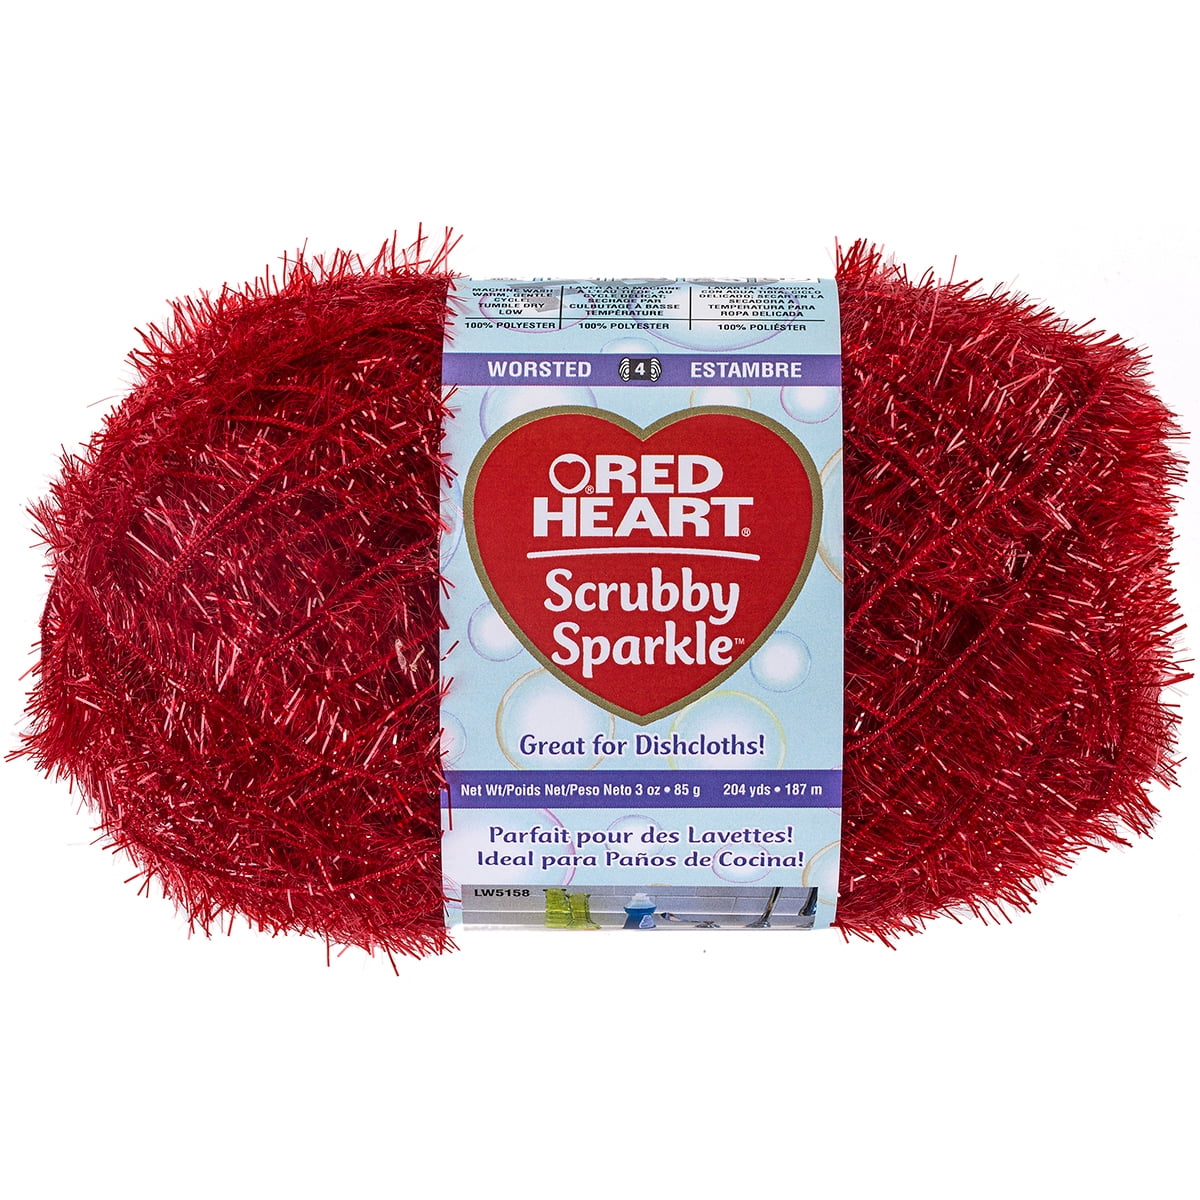 Red Heart Scrubby Duckie Yarn - 3 Pack of 100g/3.5oz - Polyester - 4 Medium  (Worsted) - 92 Yards - Knitting/Crochet